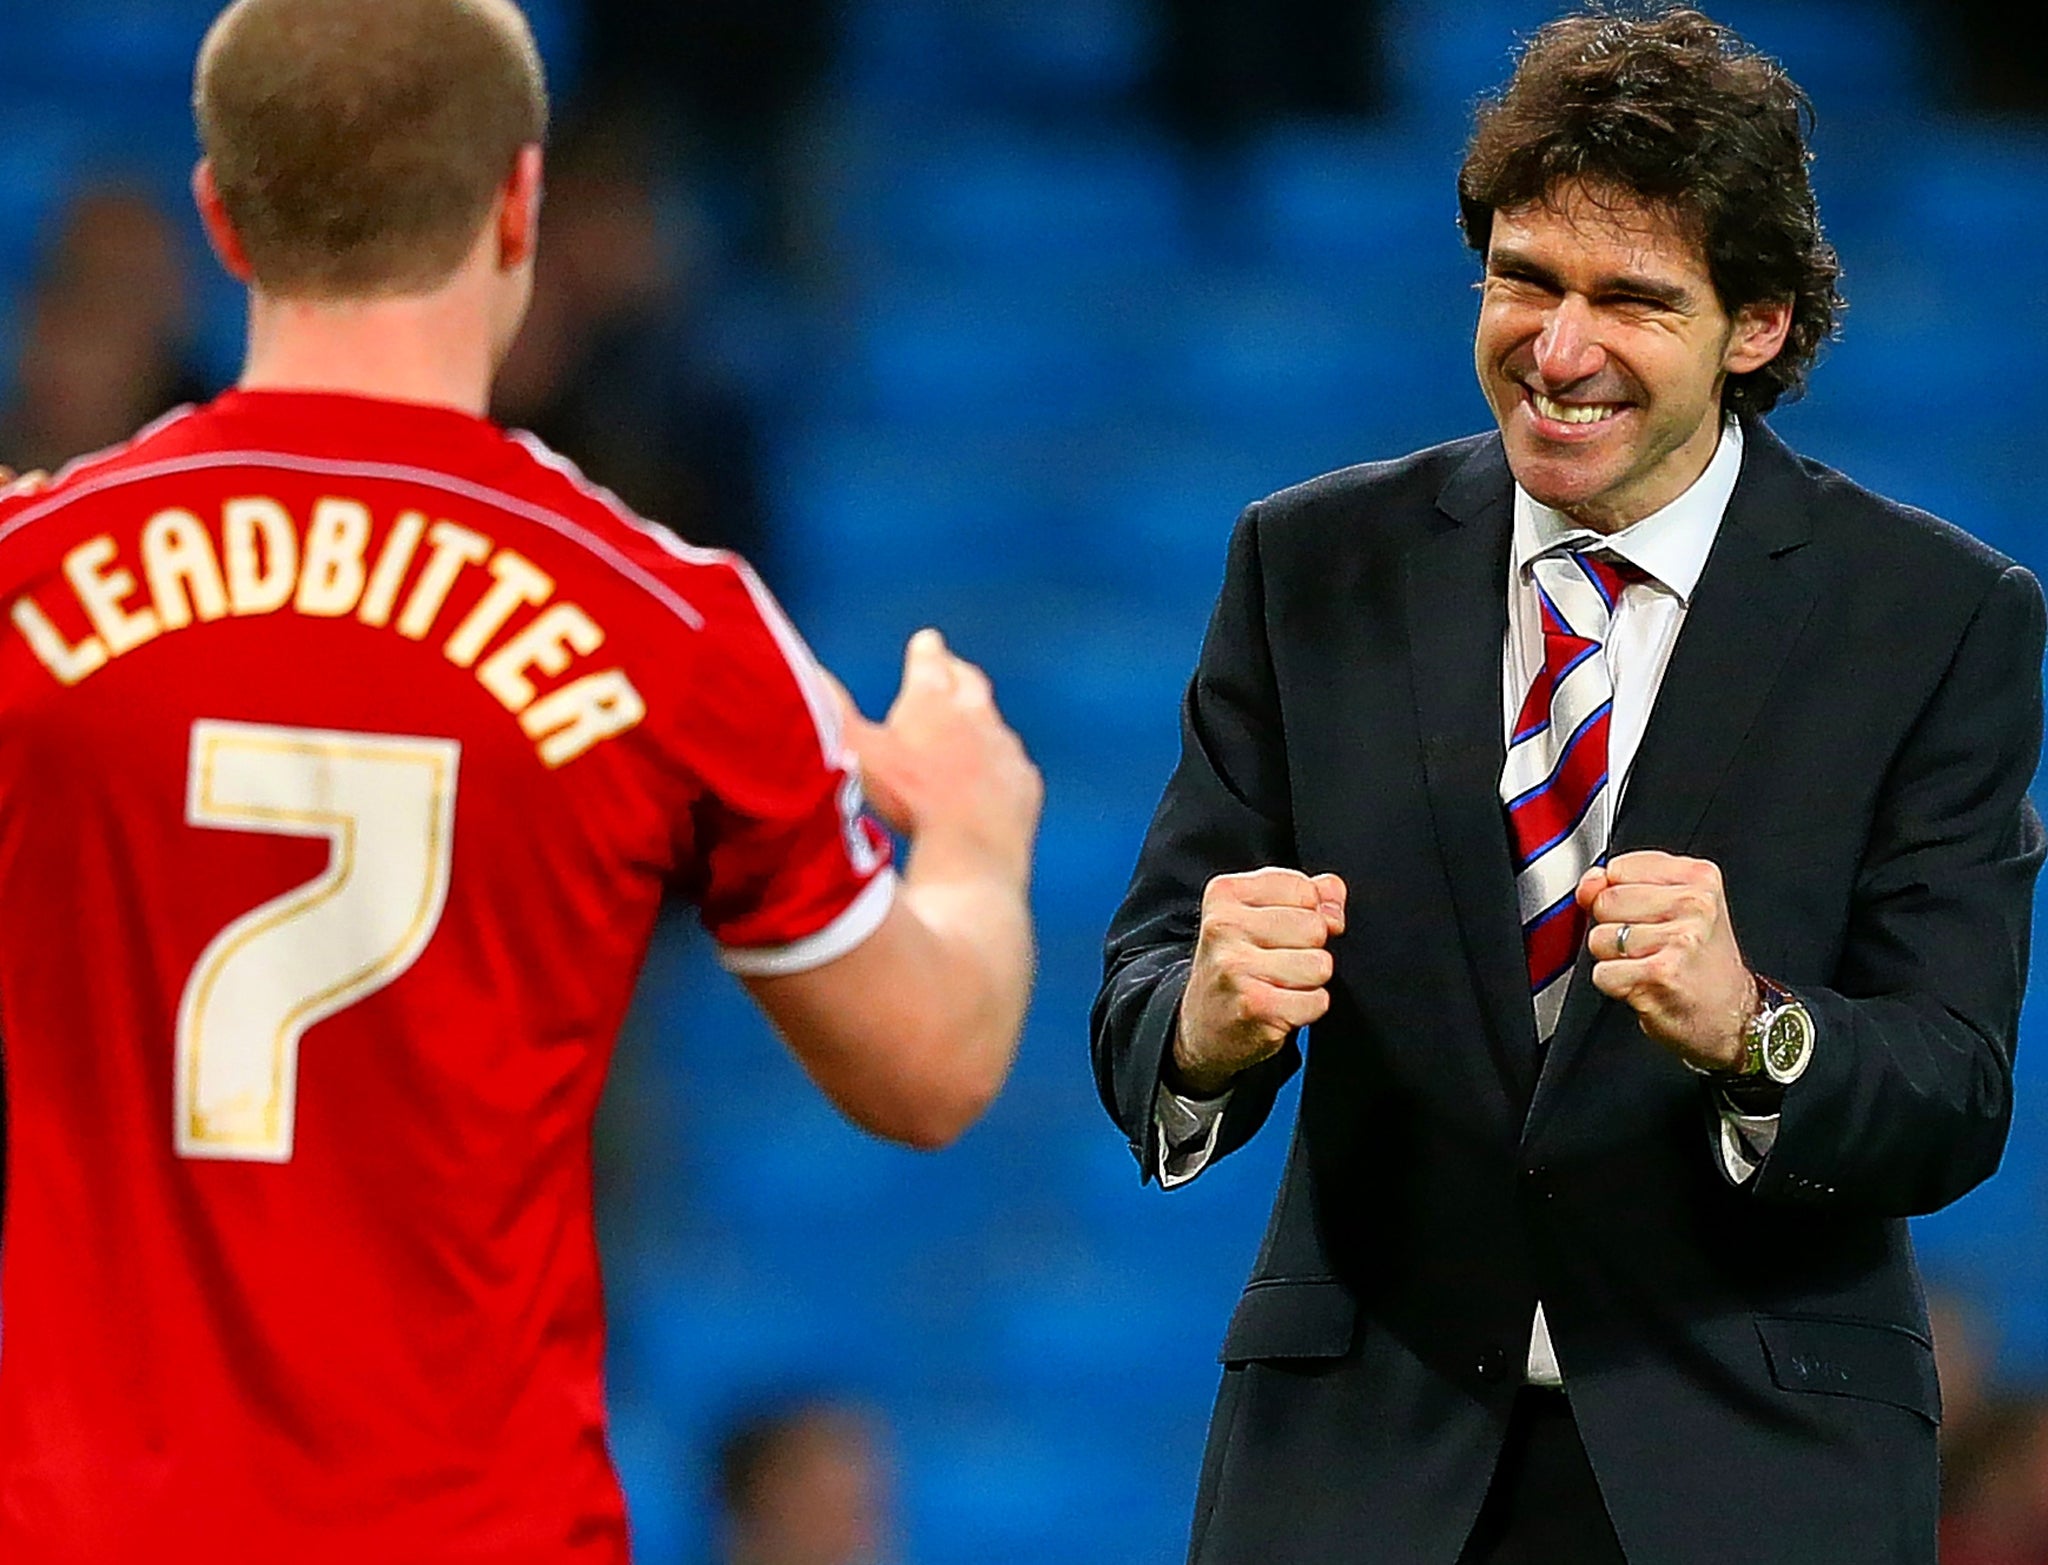 Aitor Karanka has overcome a mixed start to lead his side to Wembley